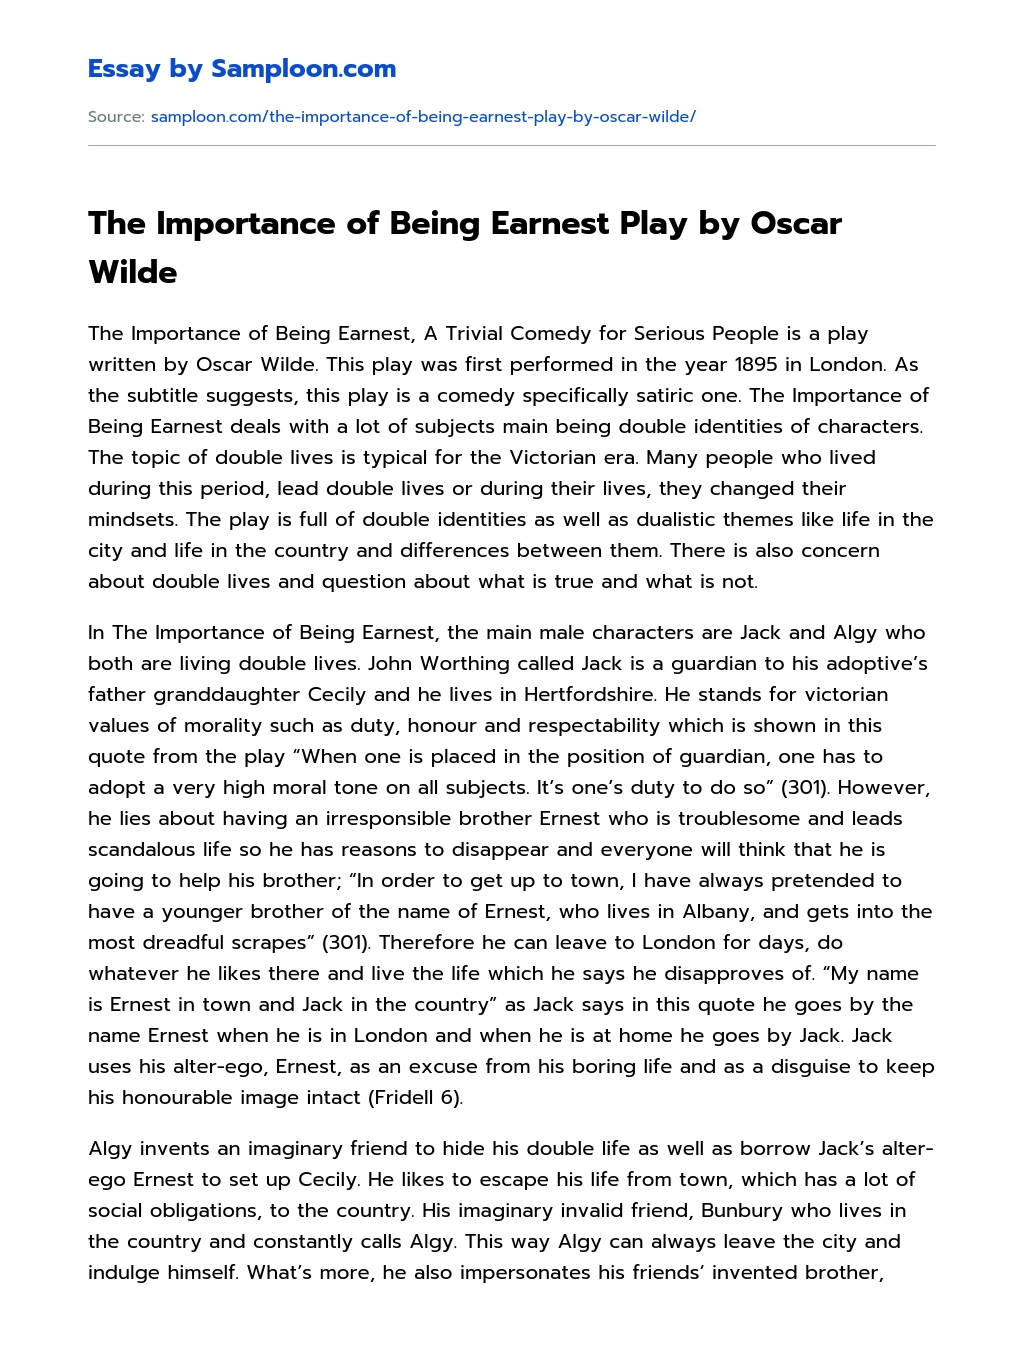 The Importance of Being Earnest Play by Oscar Wilde essay